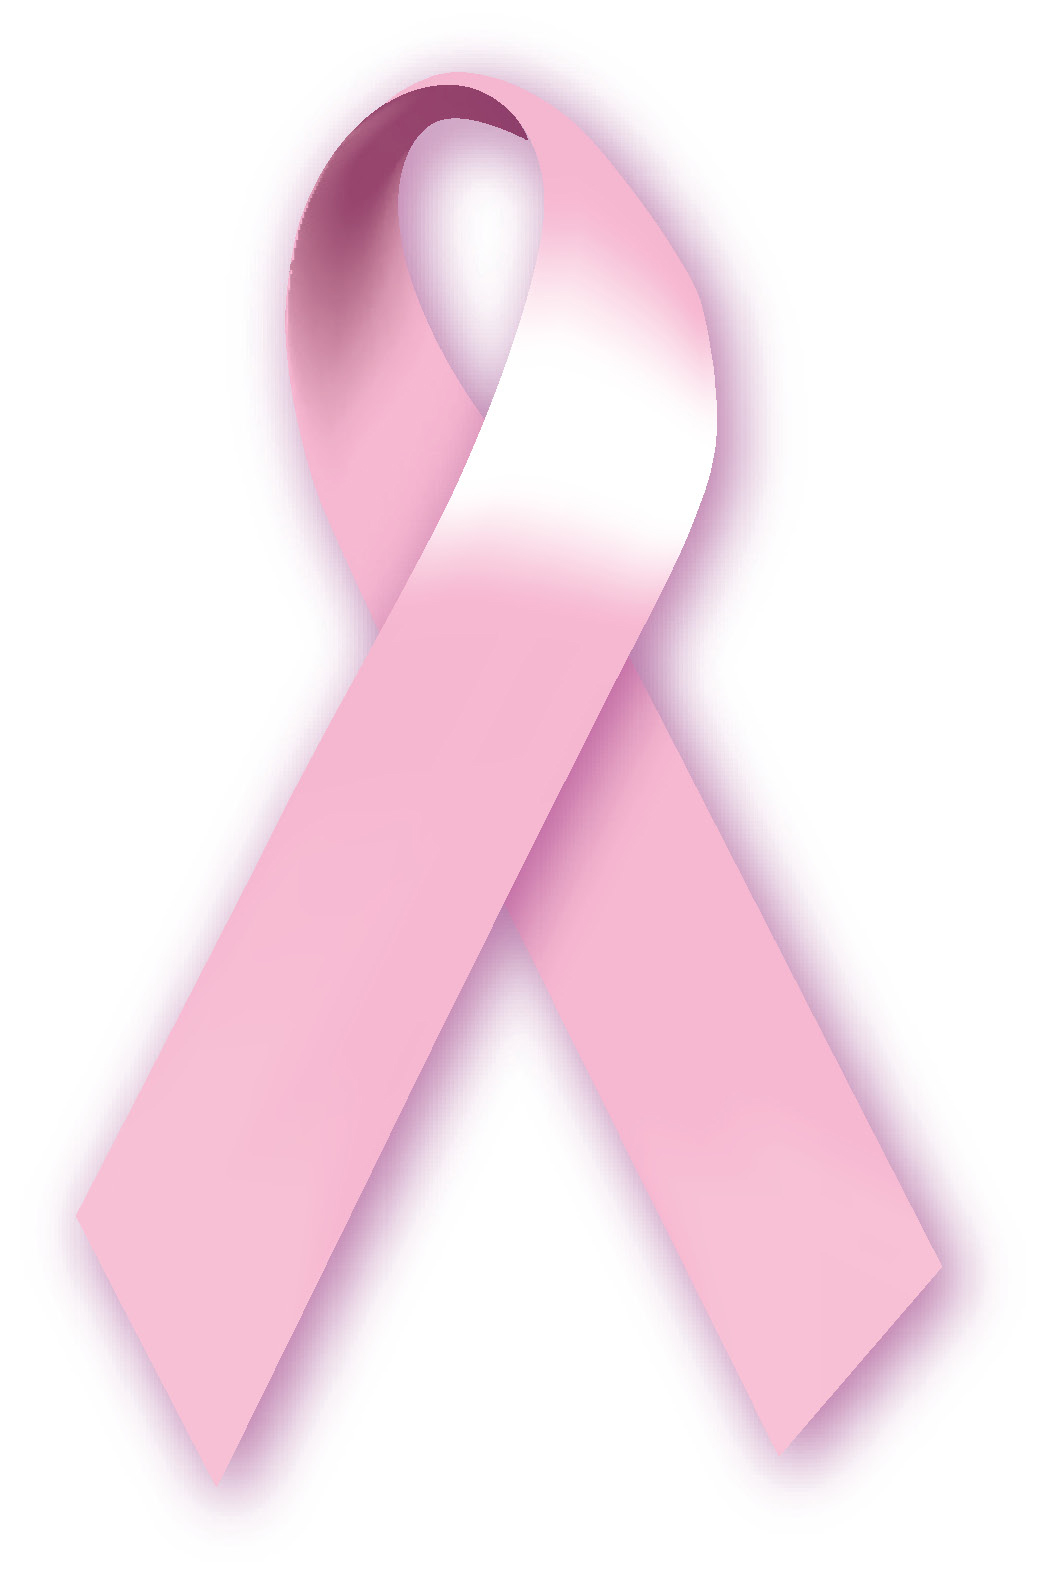 Breast Cancer Ribbon Vector File Free Download - ClipArt Best